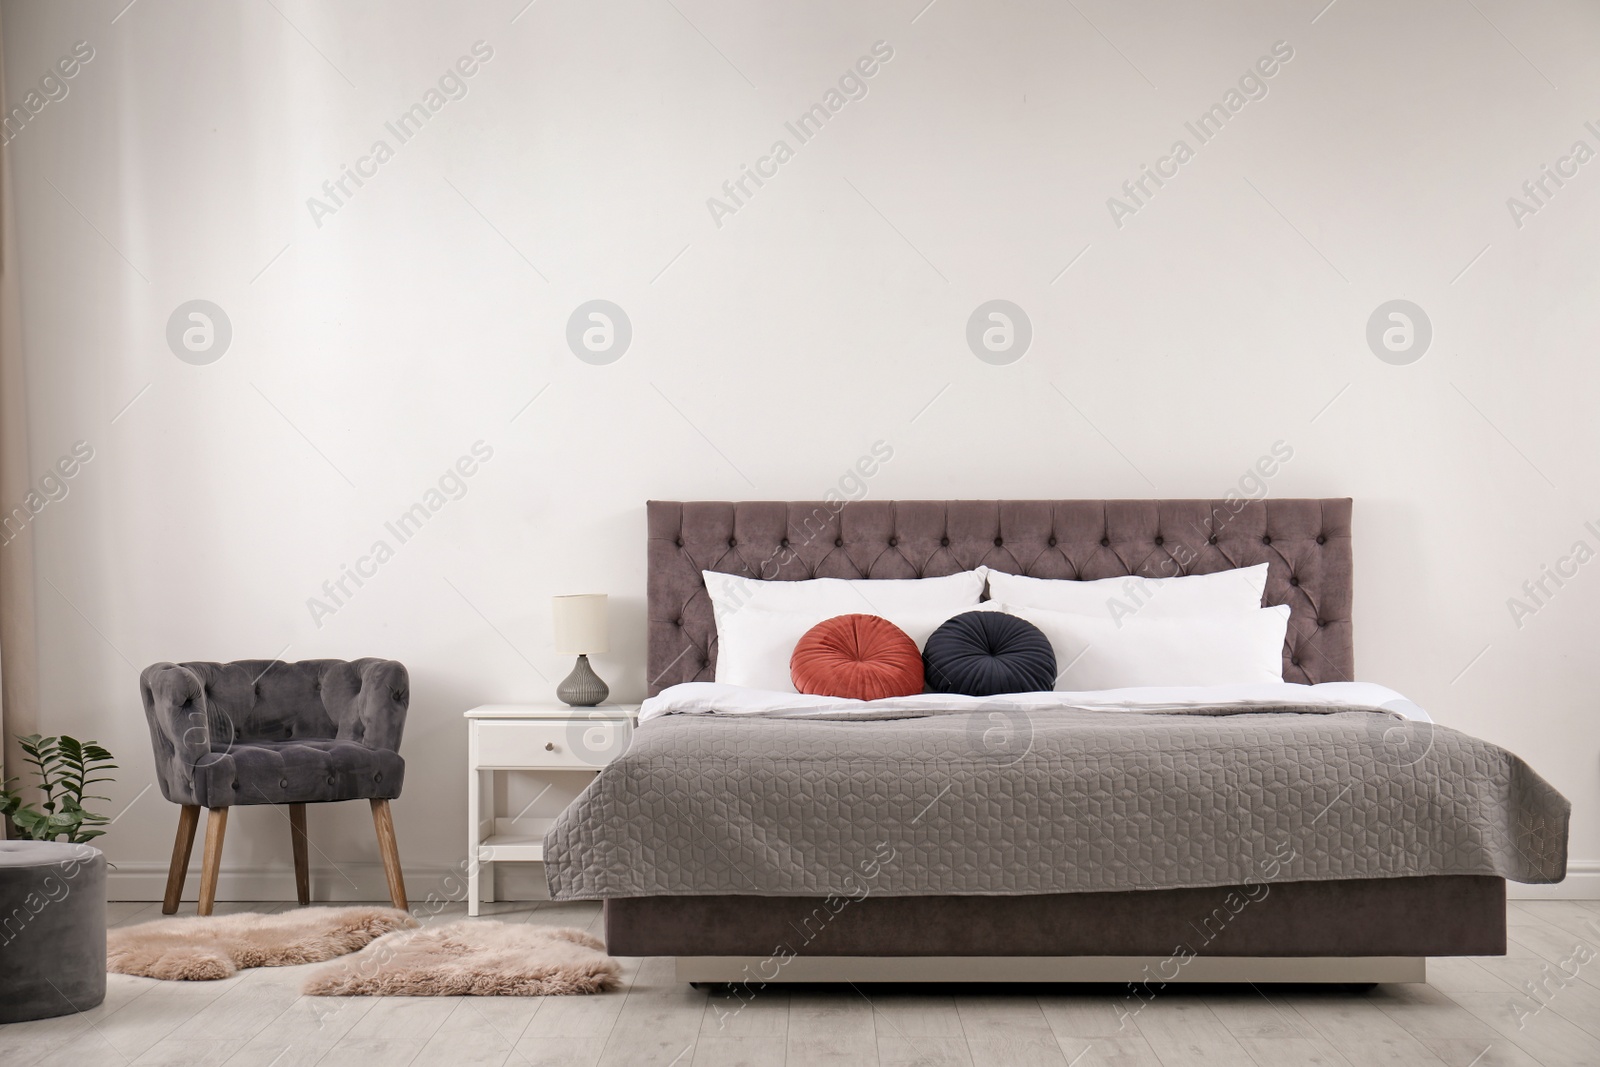 Photo of Large comfortable bed near light wall in simple room interior